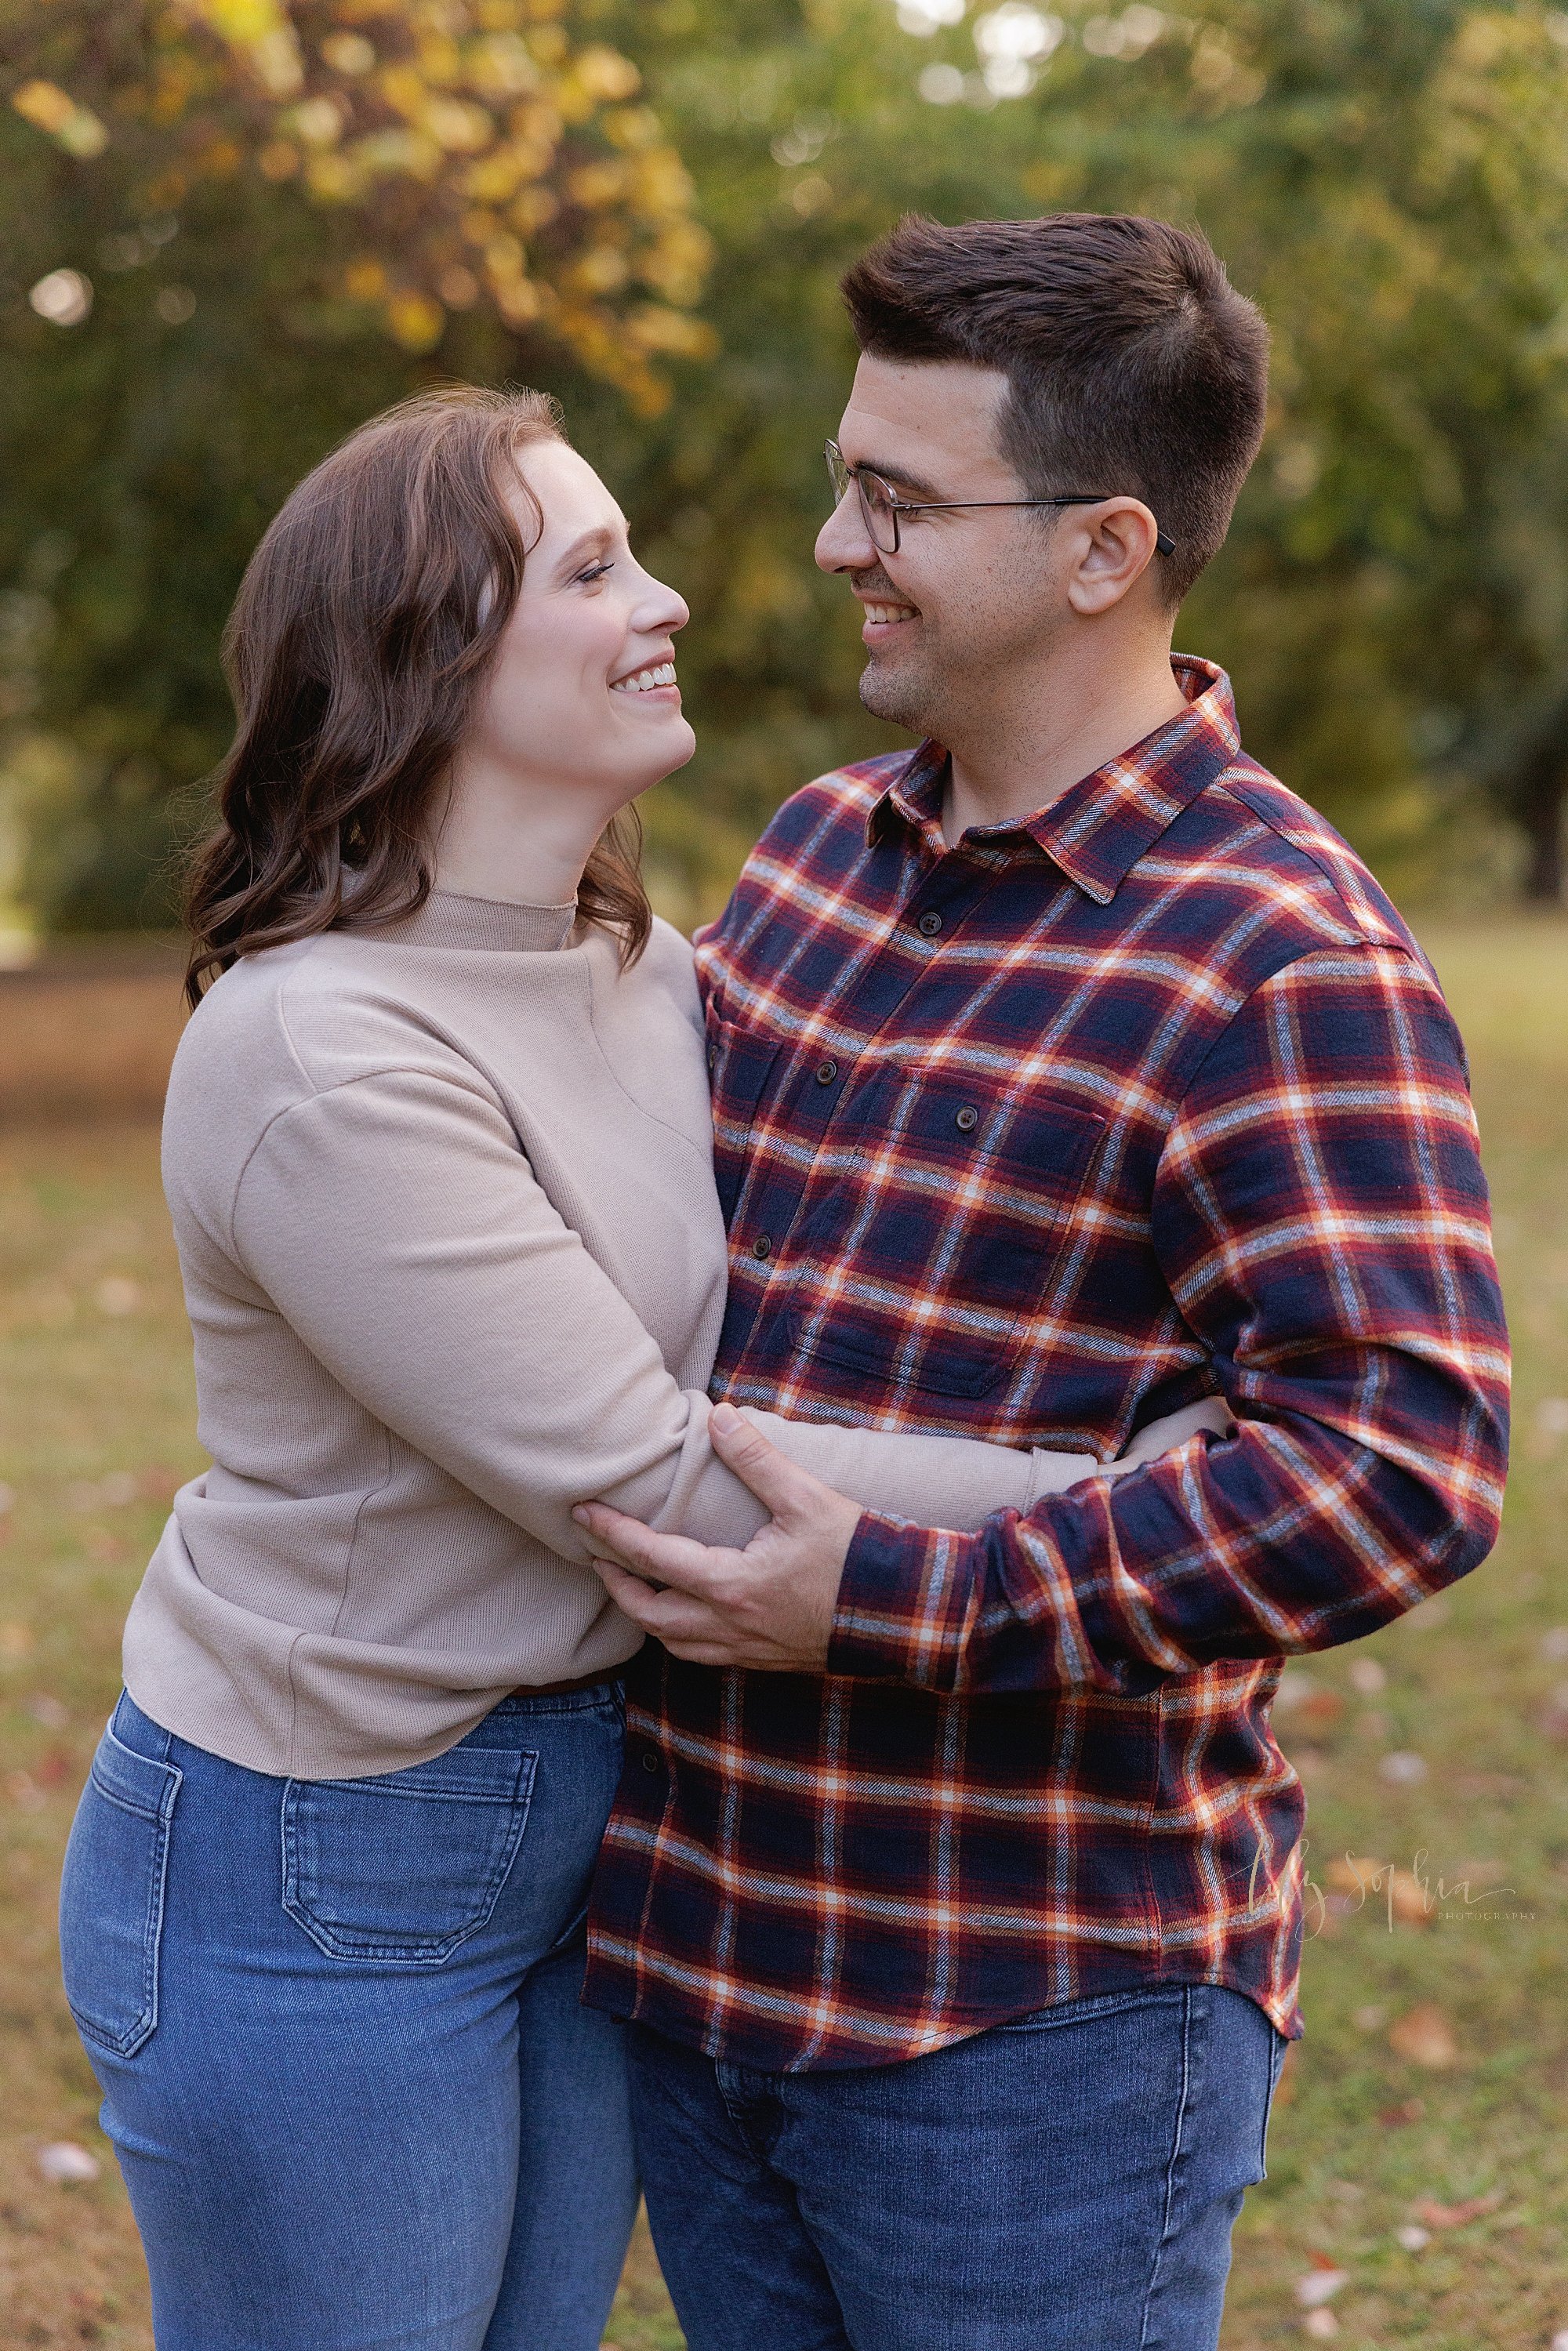  A husband and wife embrace each other while looking lovingly into each other’s eyes as they stand in an Atlanta park at sunset during autumn. 